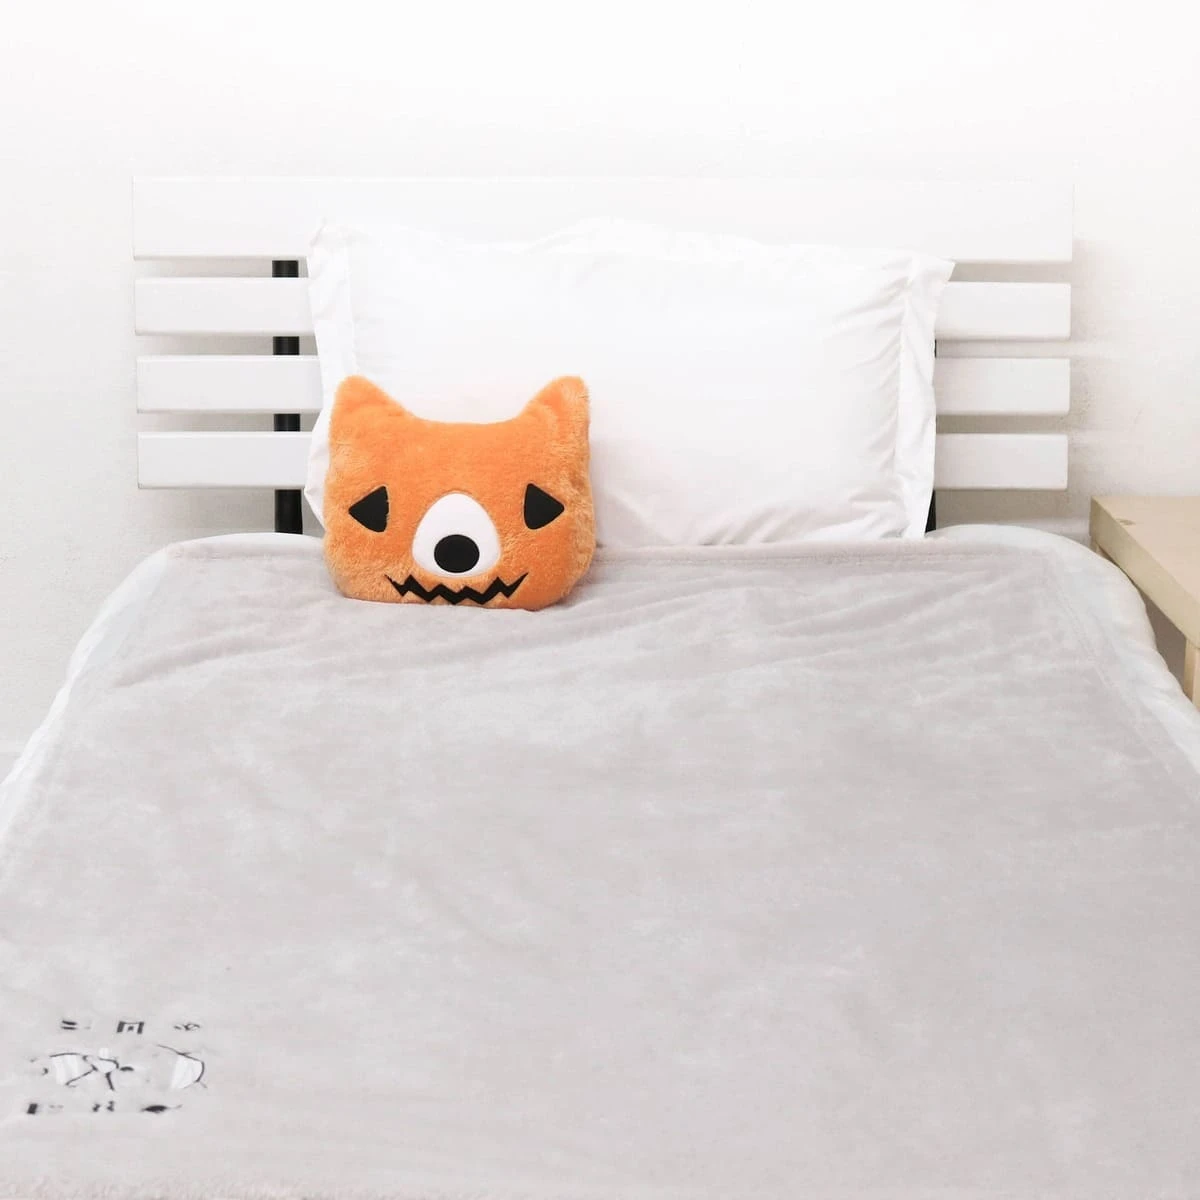 Terry V2 (Halloween Collection) 3D Embroidery Plush Pillow Blanket (Orange,Grey)